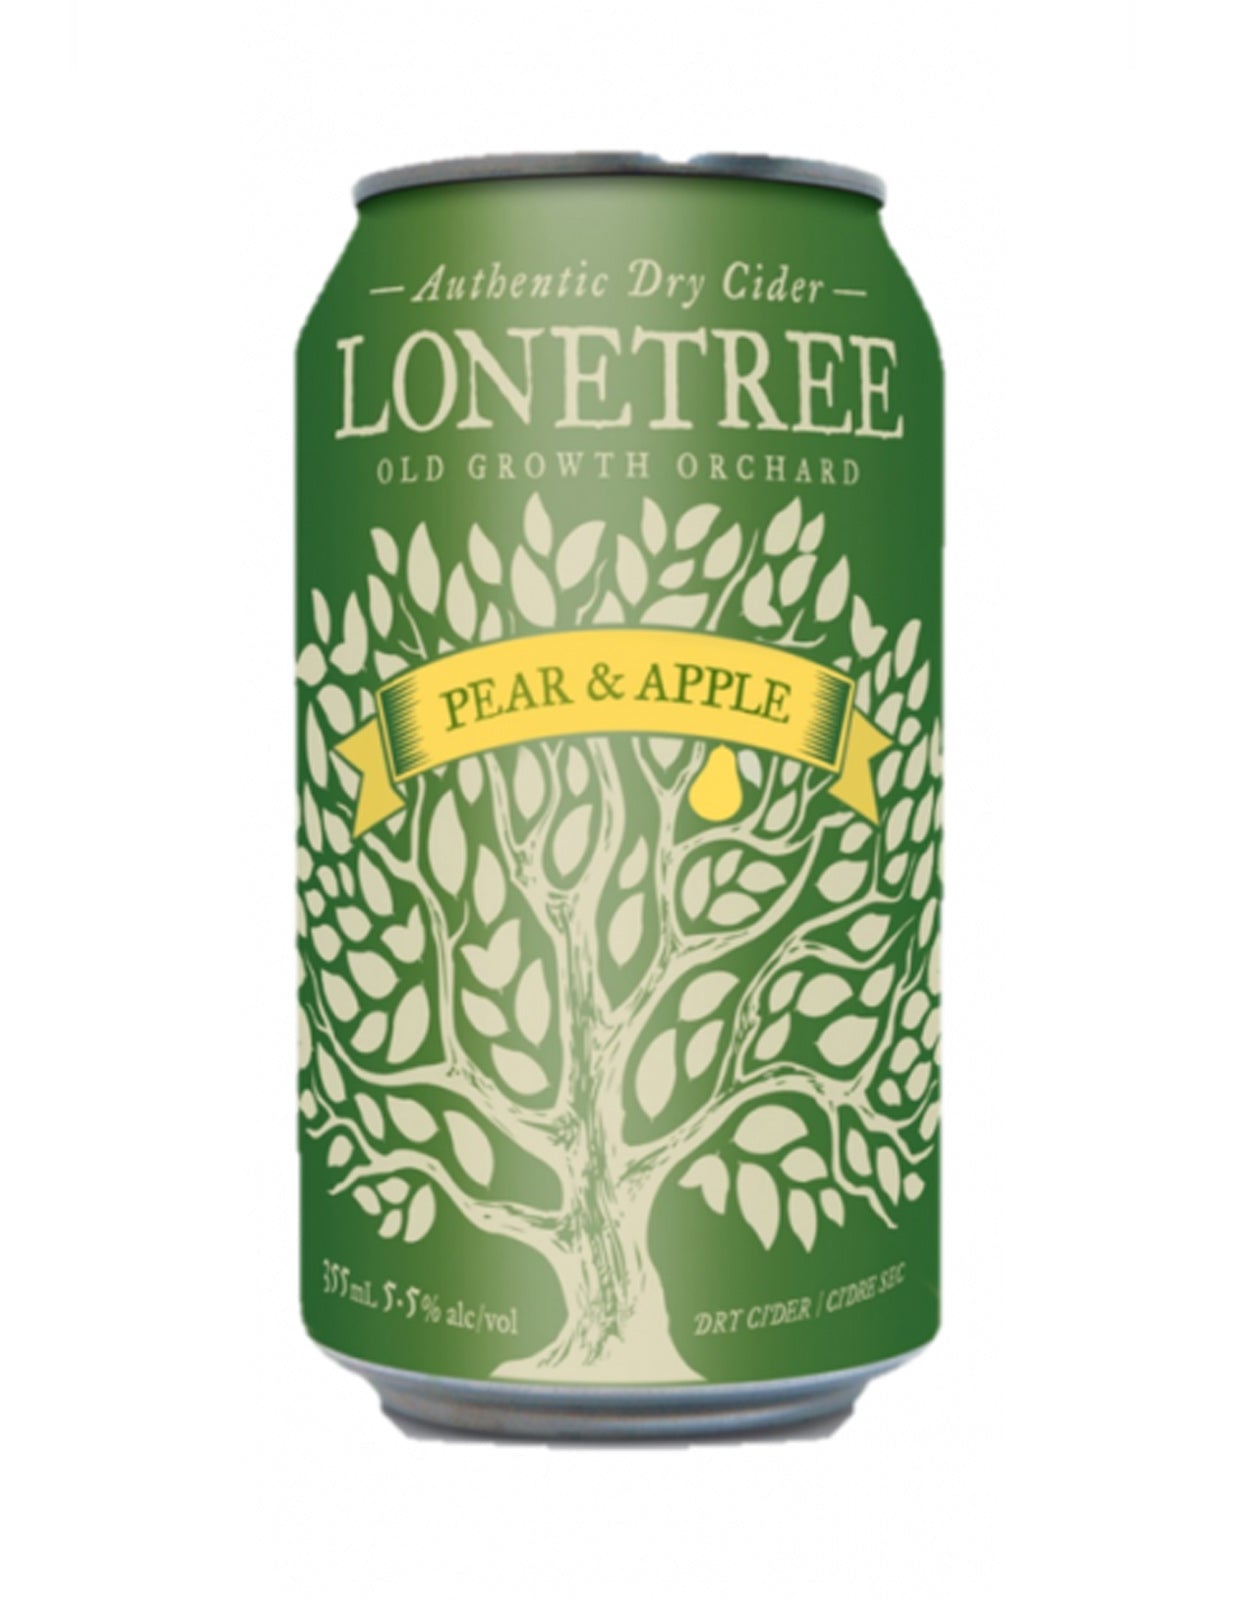 Lonetree Pear & Apple Cider 355 ml - 6 Cans